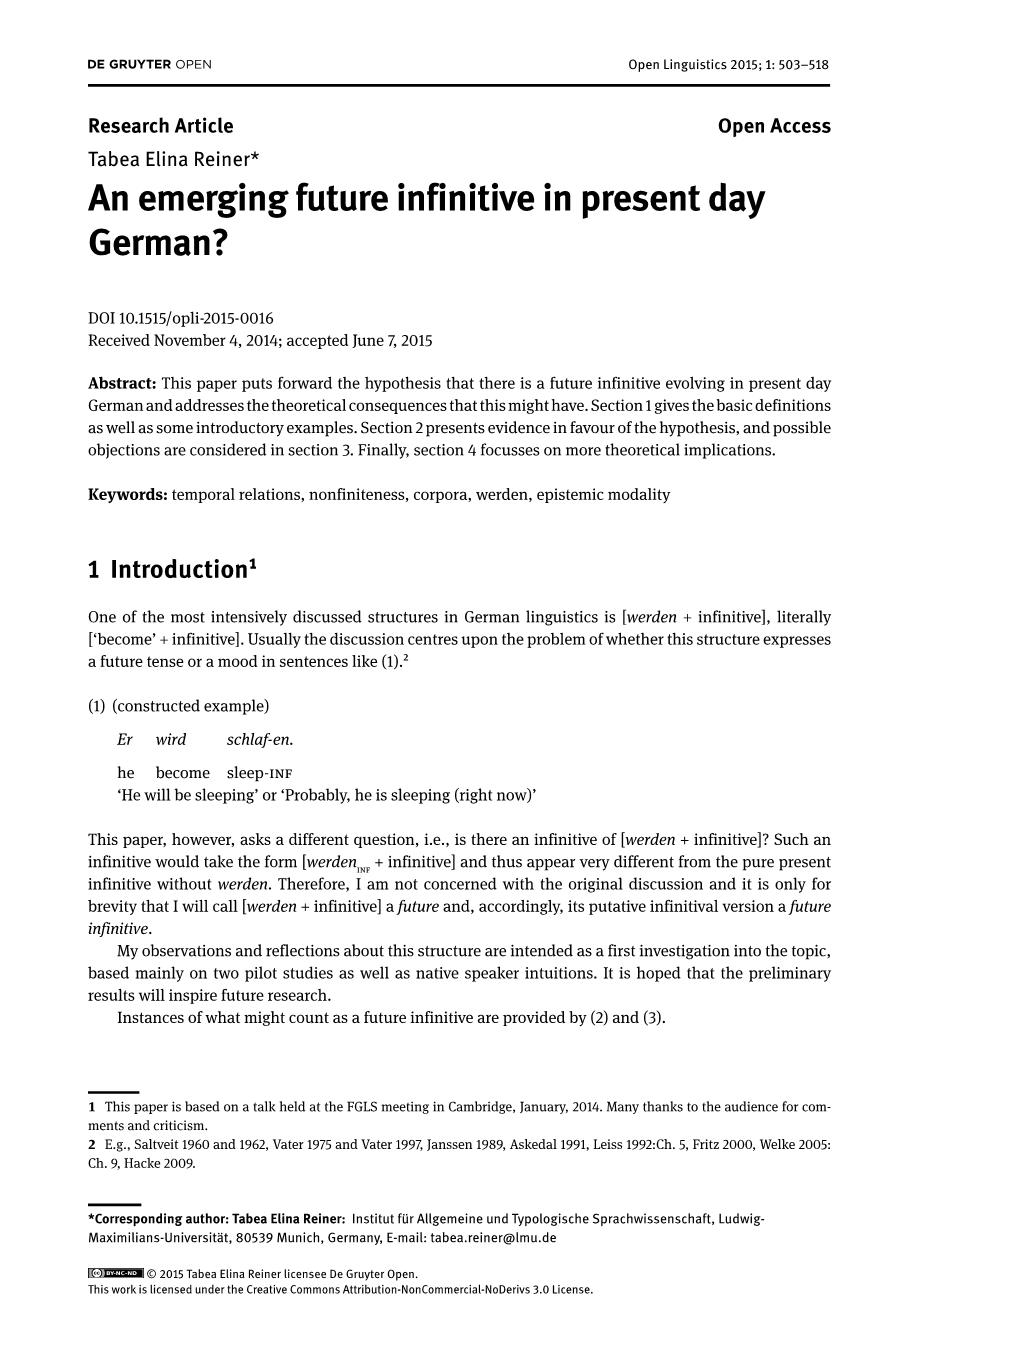 An Emerging Future Infinitive in Present Day German?